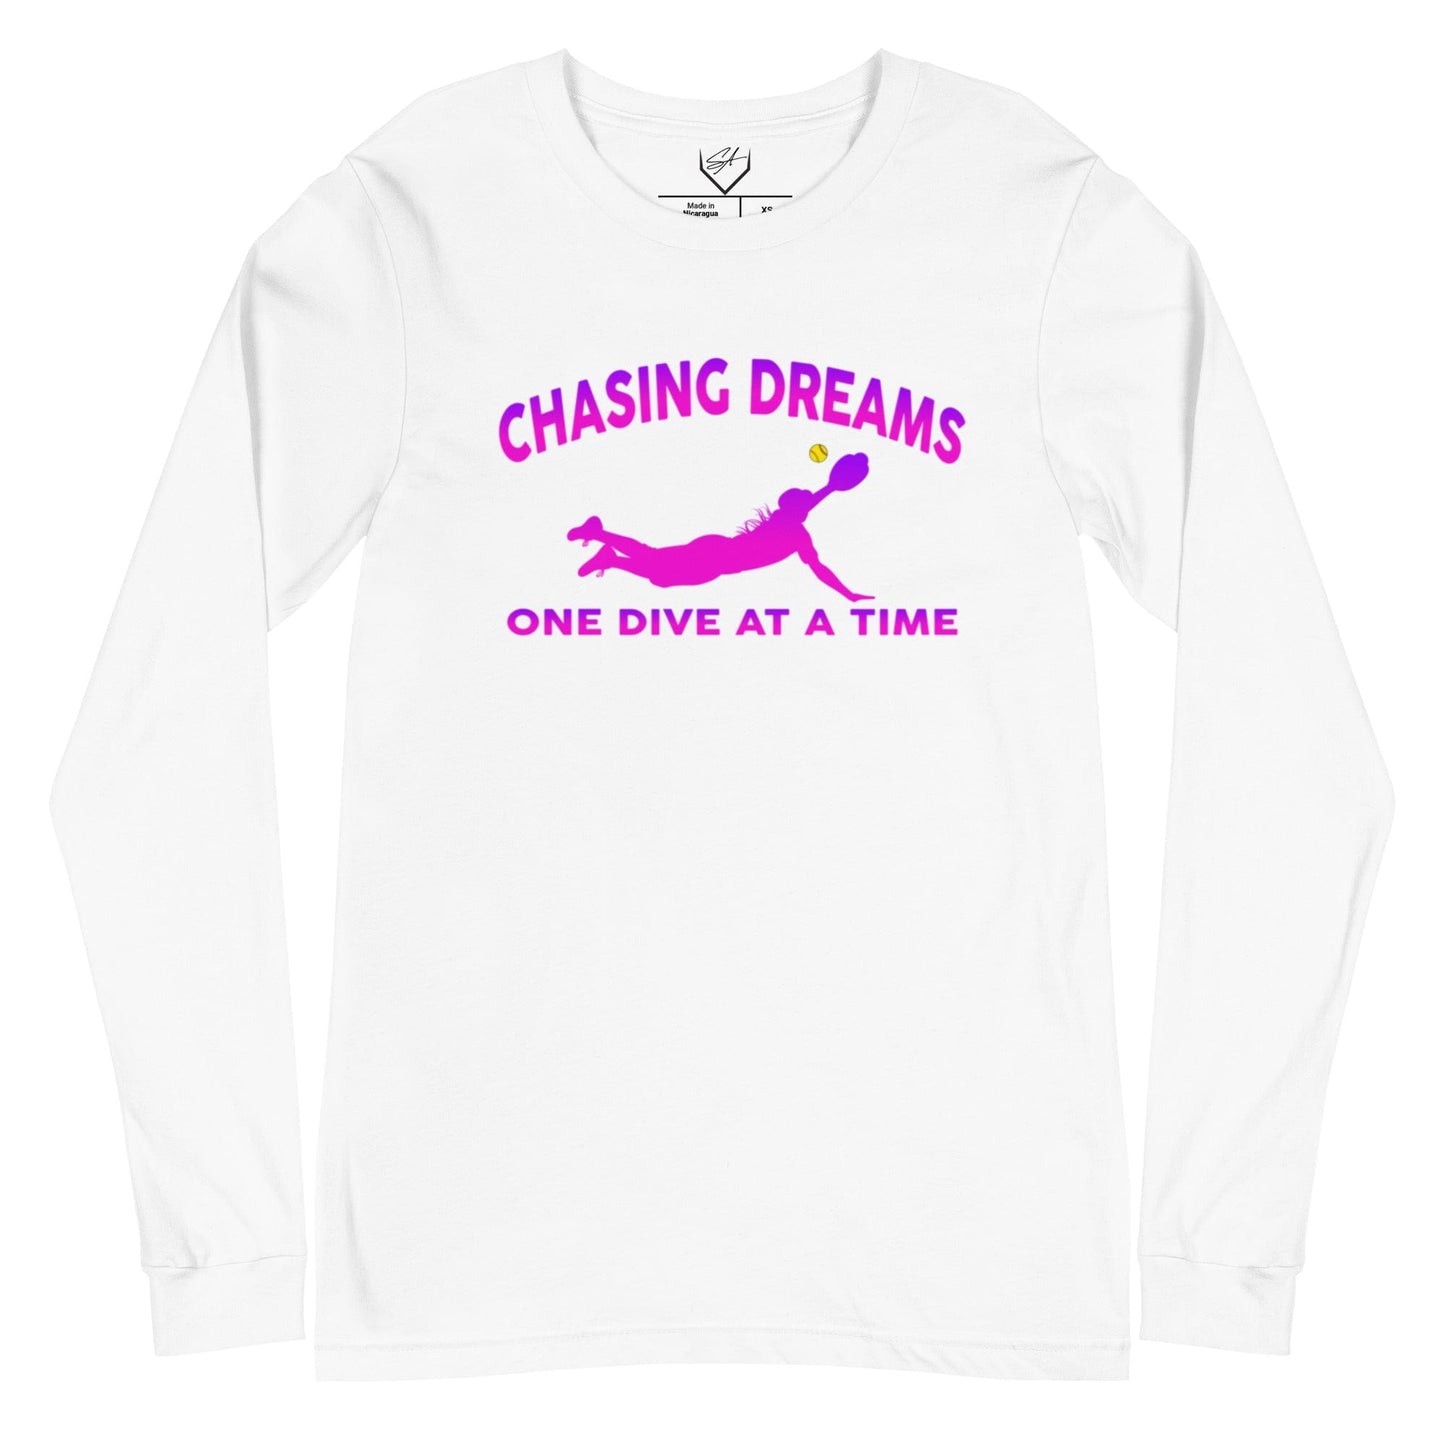 Chasing Dreams One Dive At A Time - Adult Long Sleeve